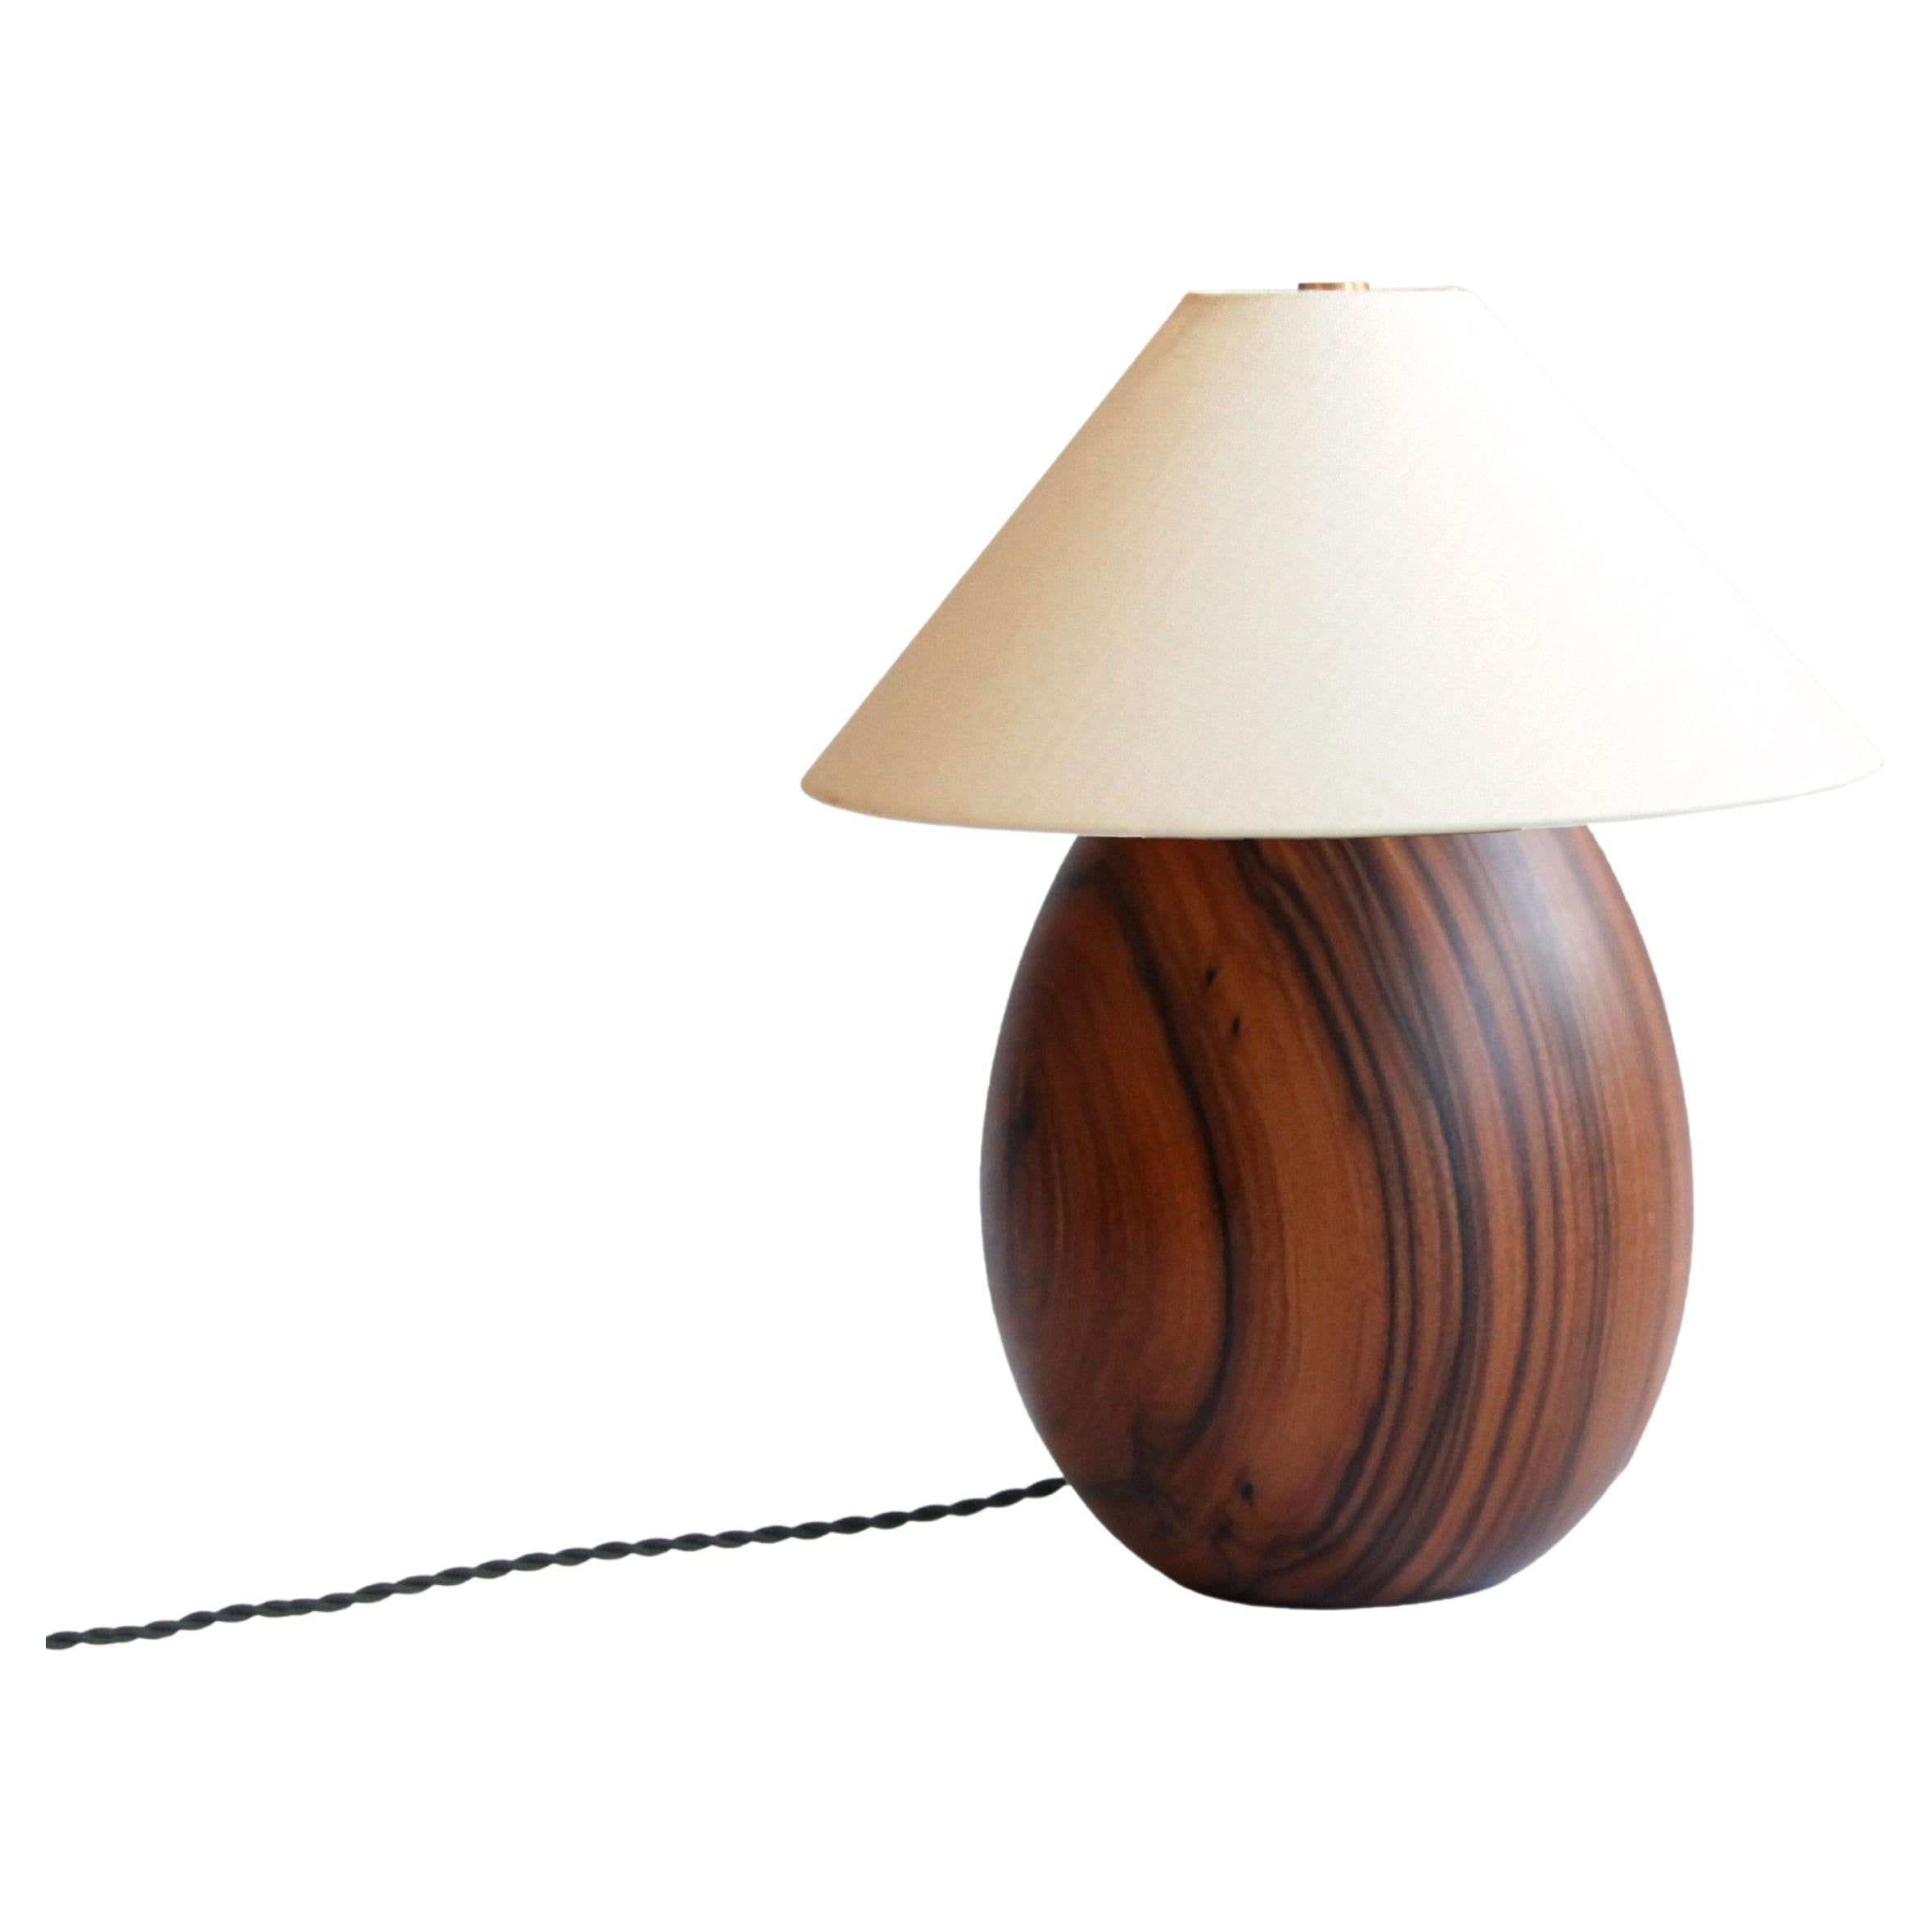 Tropical Hardwood Lamp and White Linen Shade, Small, Árbol Collection, 25